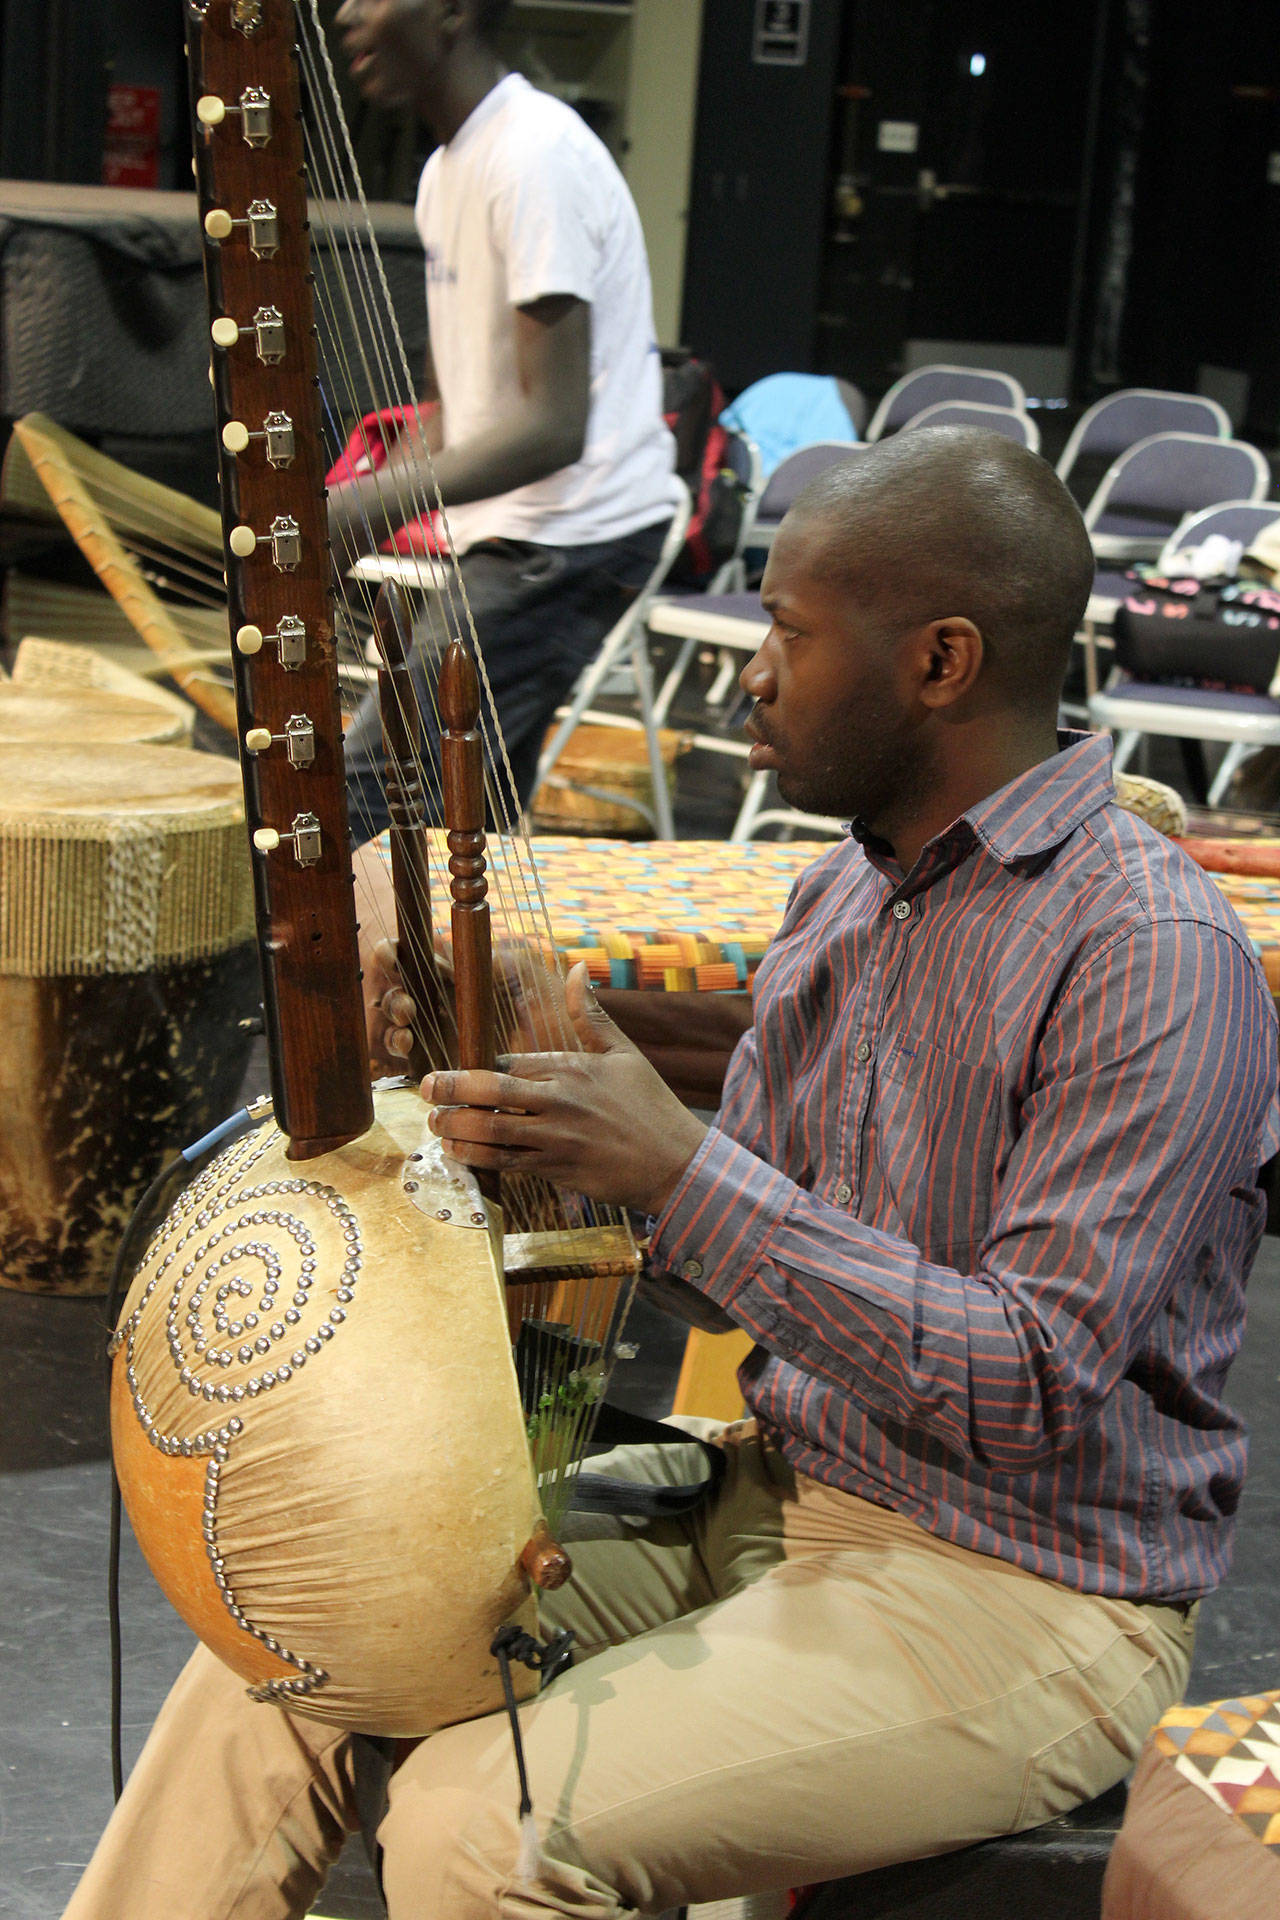 Co-founder of Dance of Hope, Kinobe Herbert, plays an instrument called an adungo.